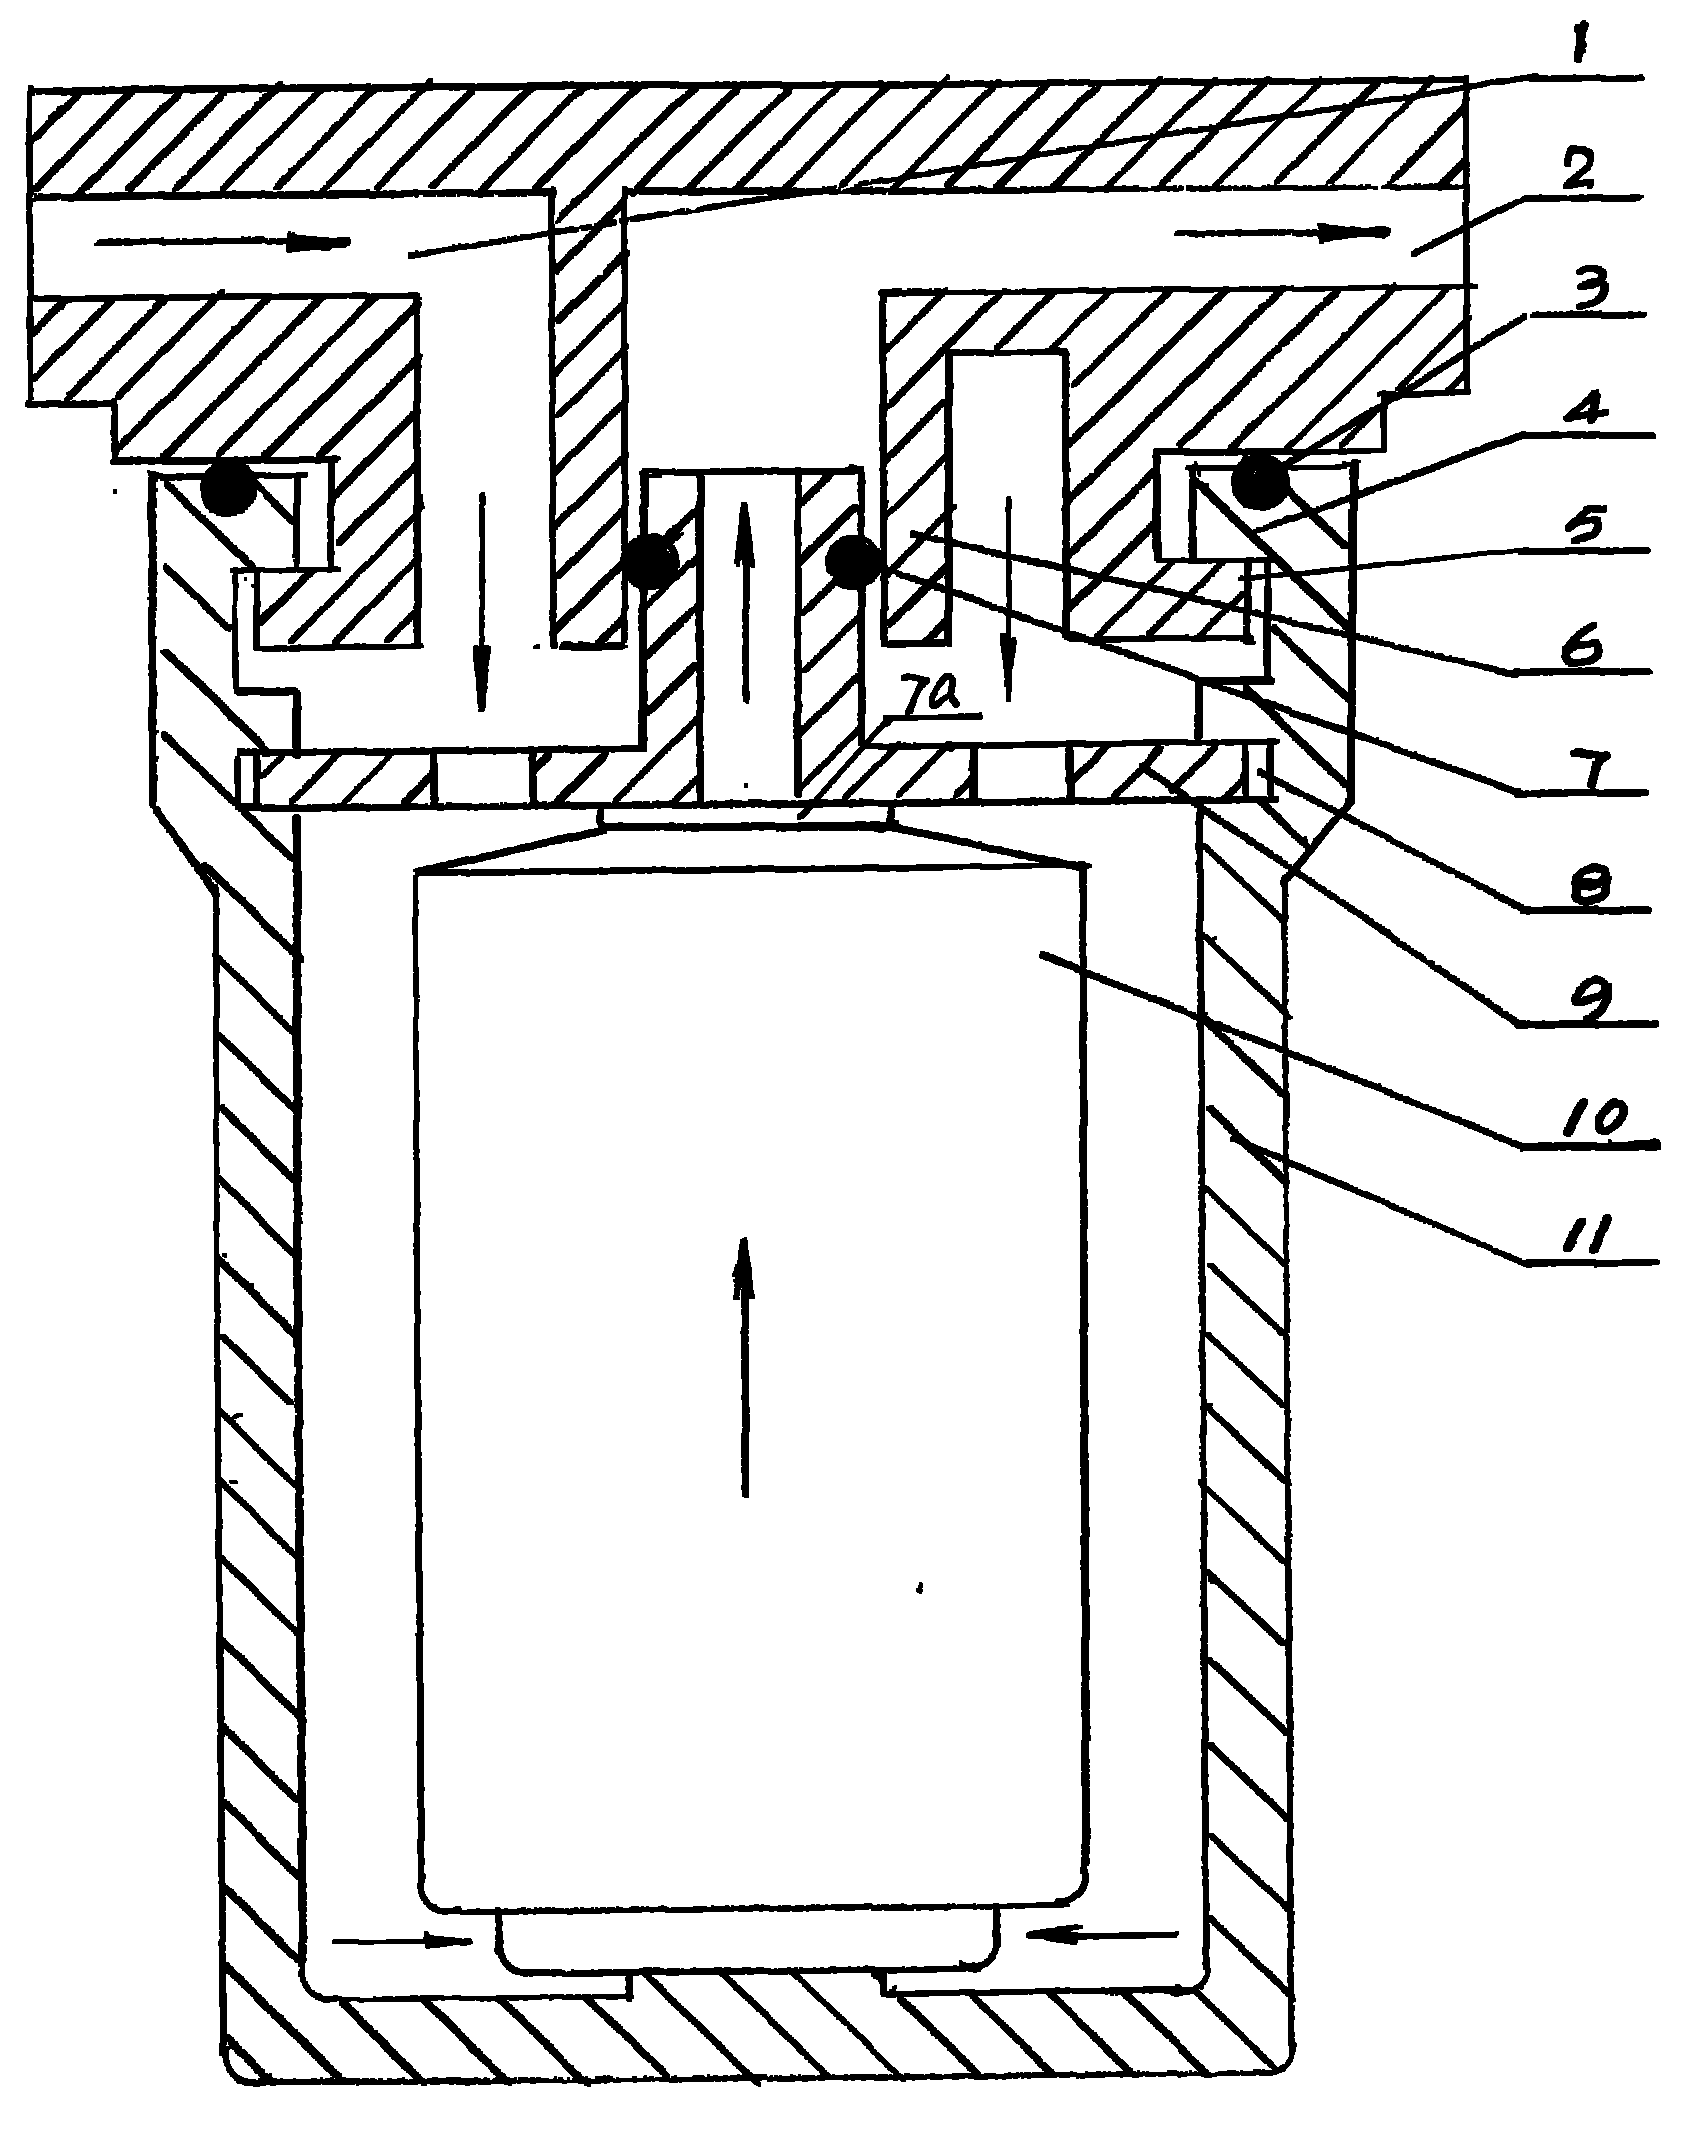 Method for connecting opening filter housing with base of water purifier